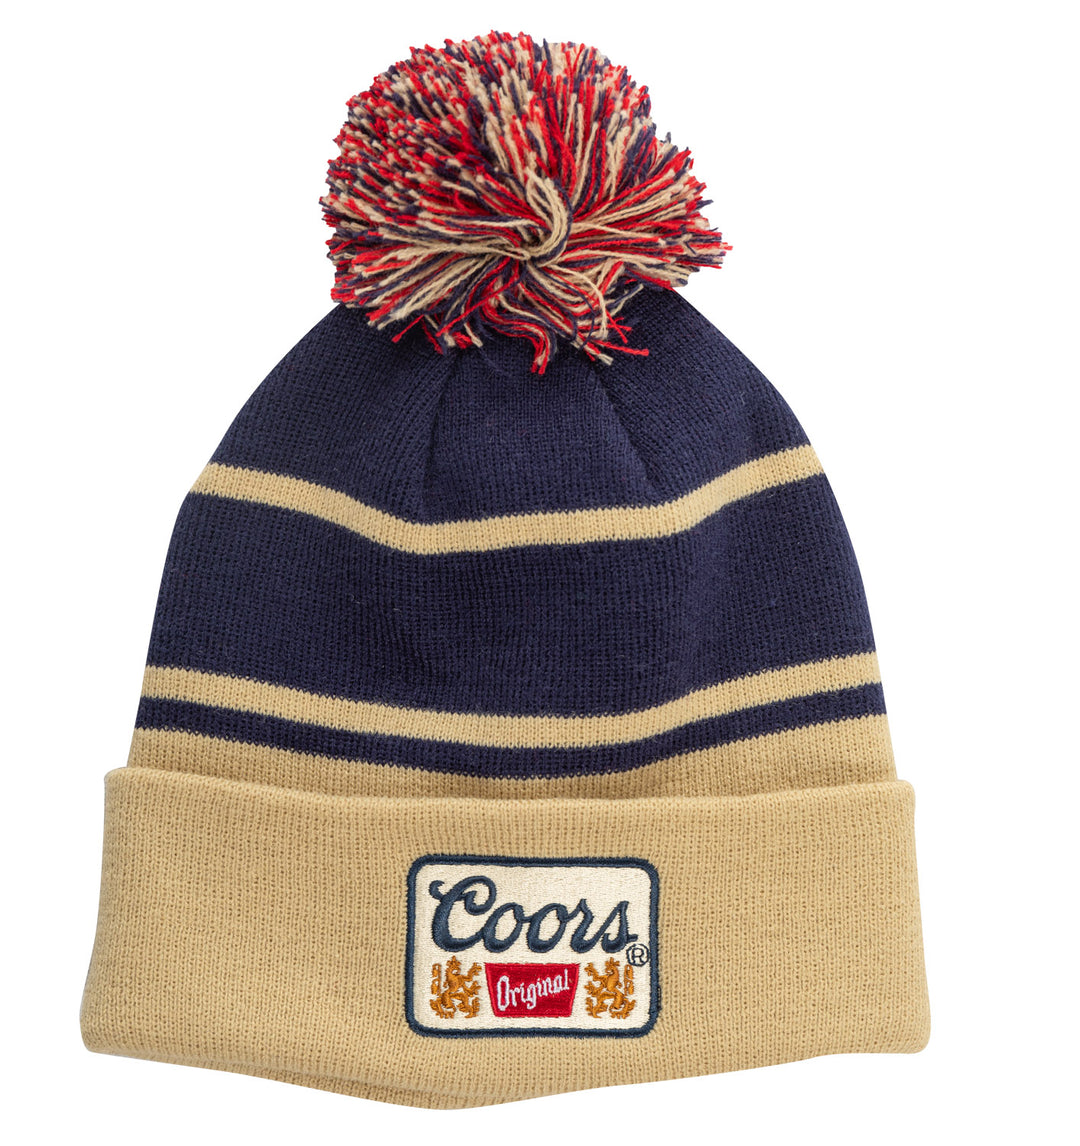 Official Licensed Coors Original Beanie